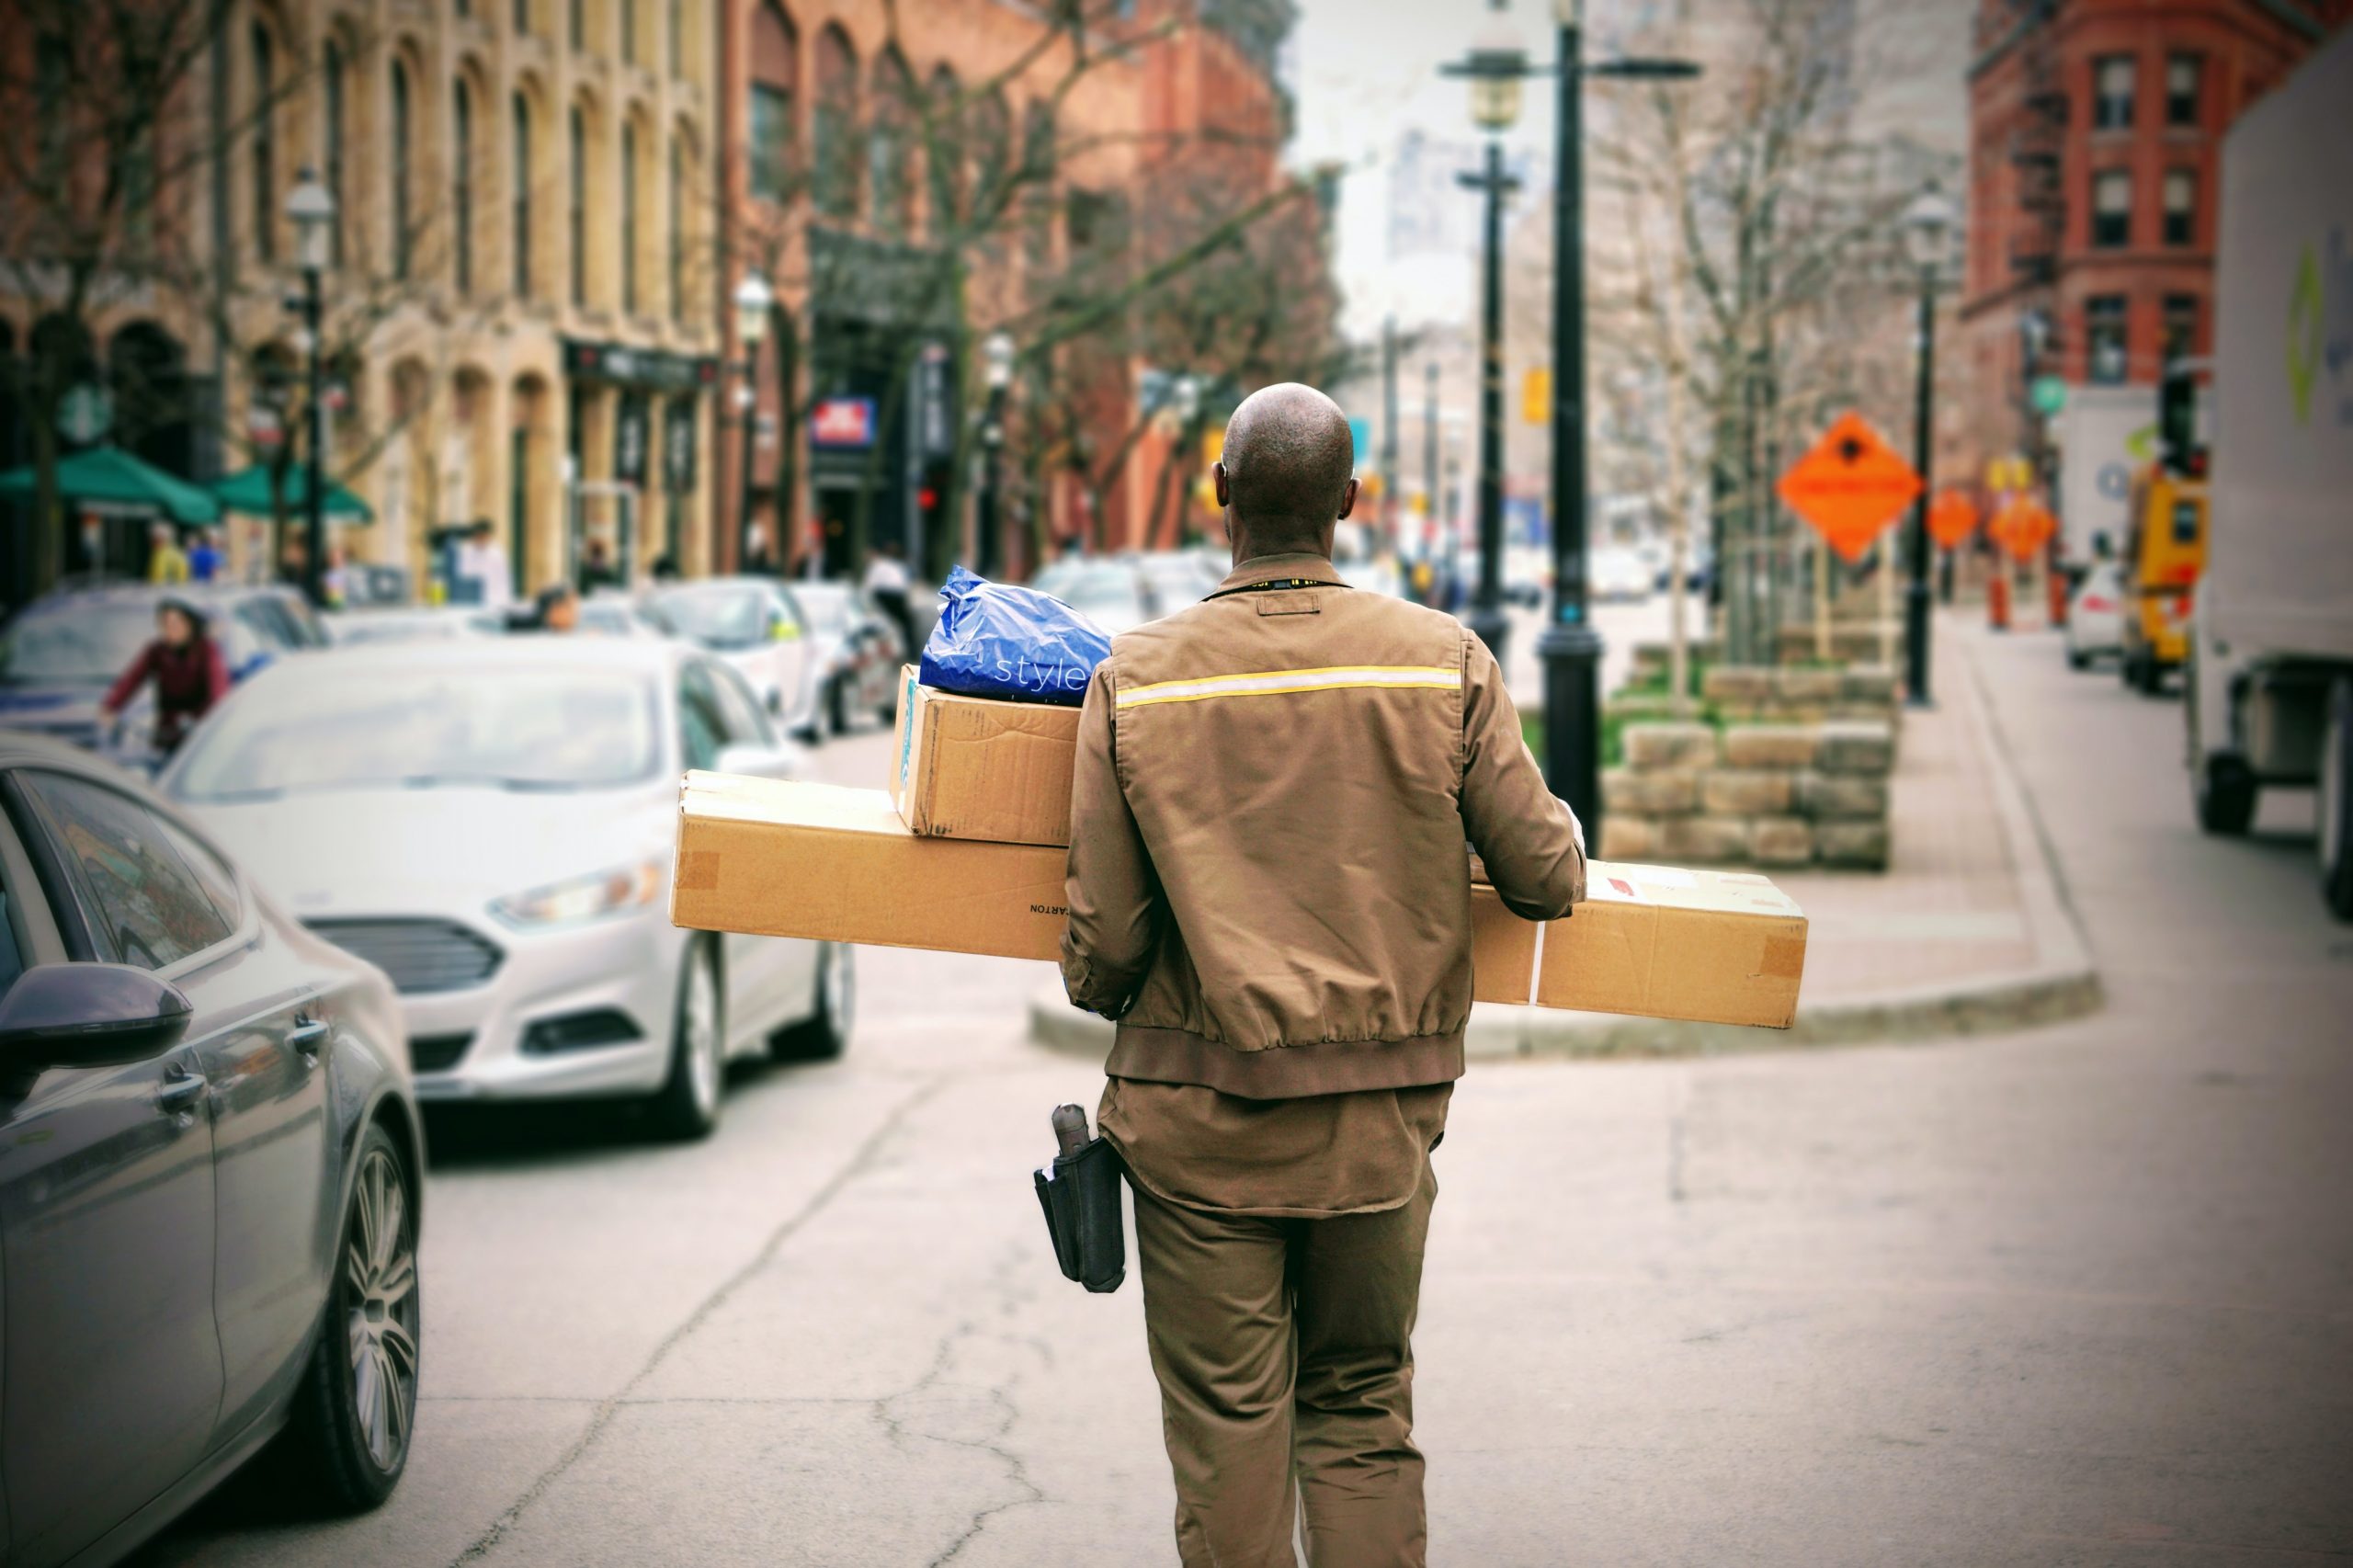 a man carrying boxes on his back